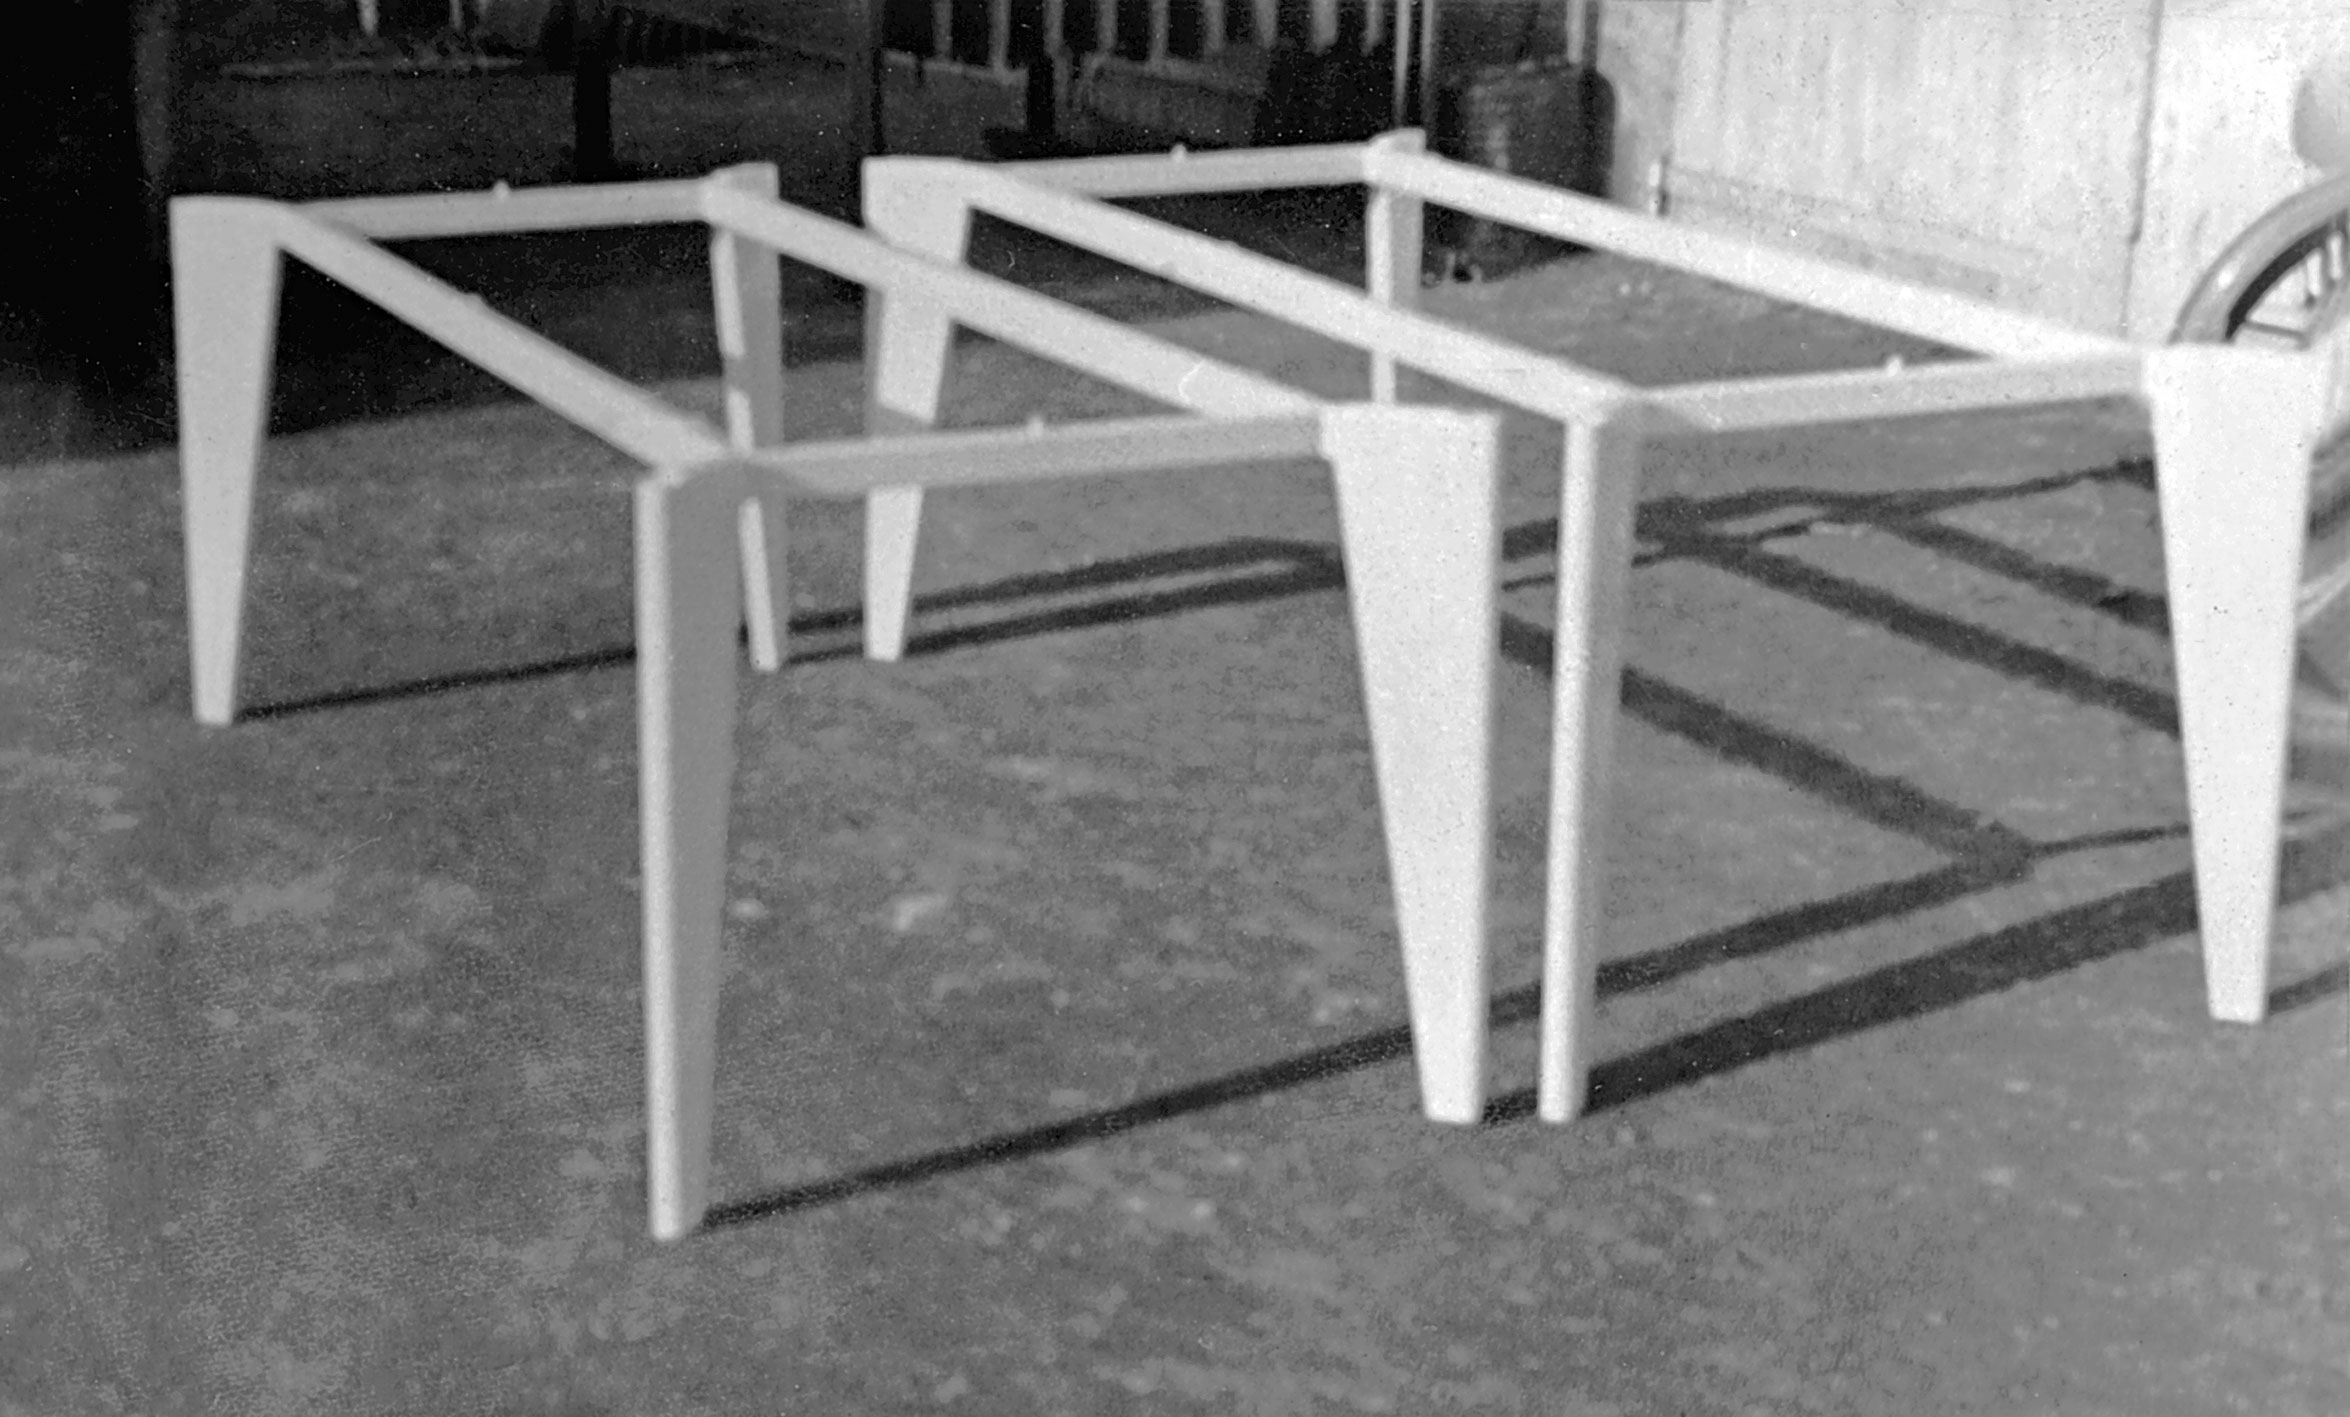 Structures of Flavigny model tables, prototypes in the workshop, ca. 1944.